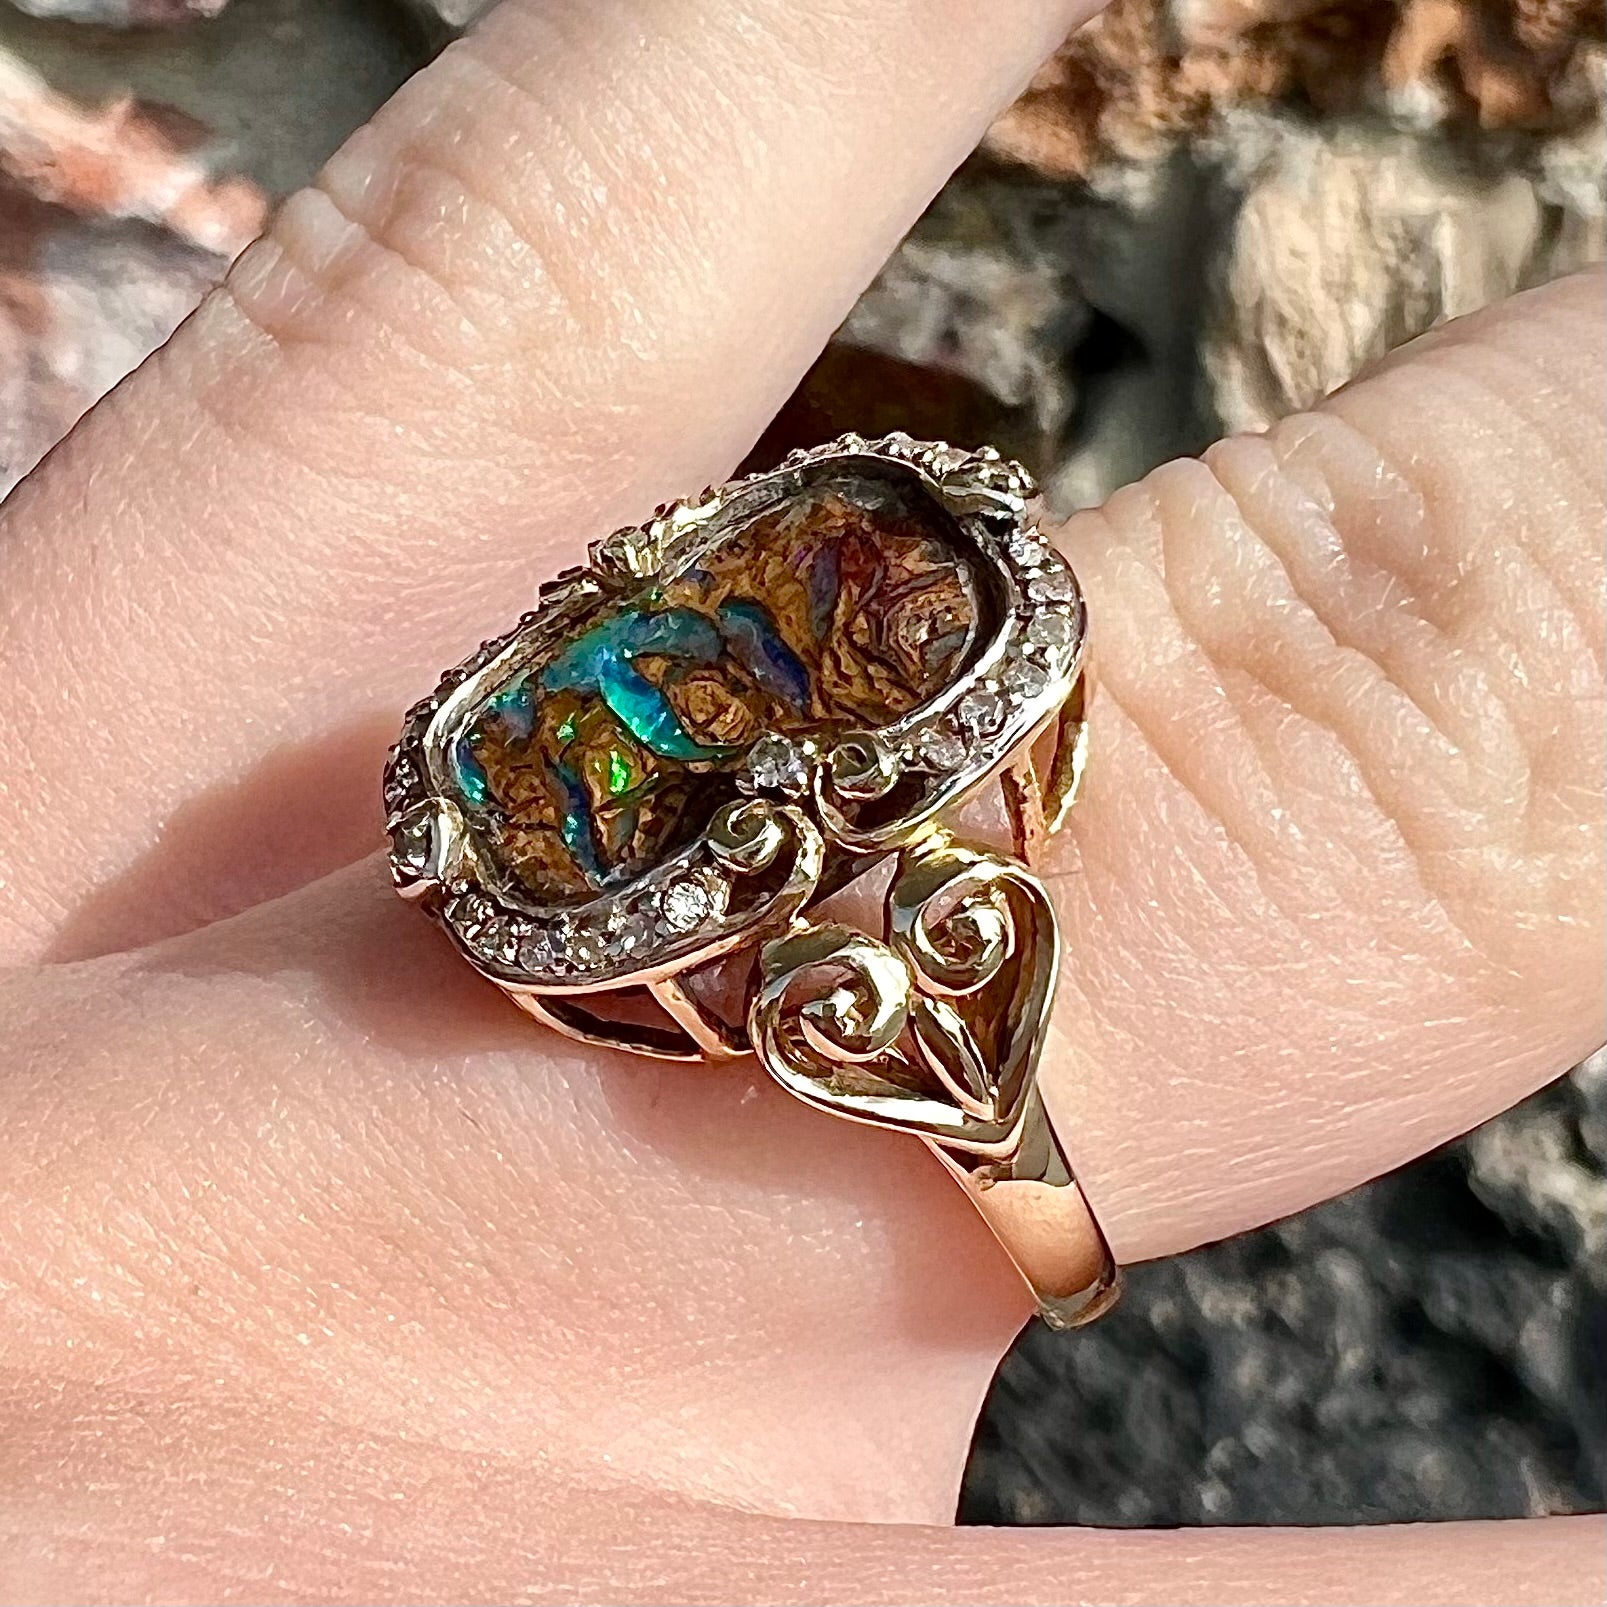 Striped Koroit boulder opal set in a filigree 14k yellow gold setting with diamonds.  The filigree has a heart pattern.